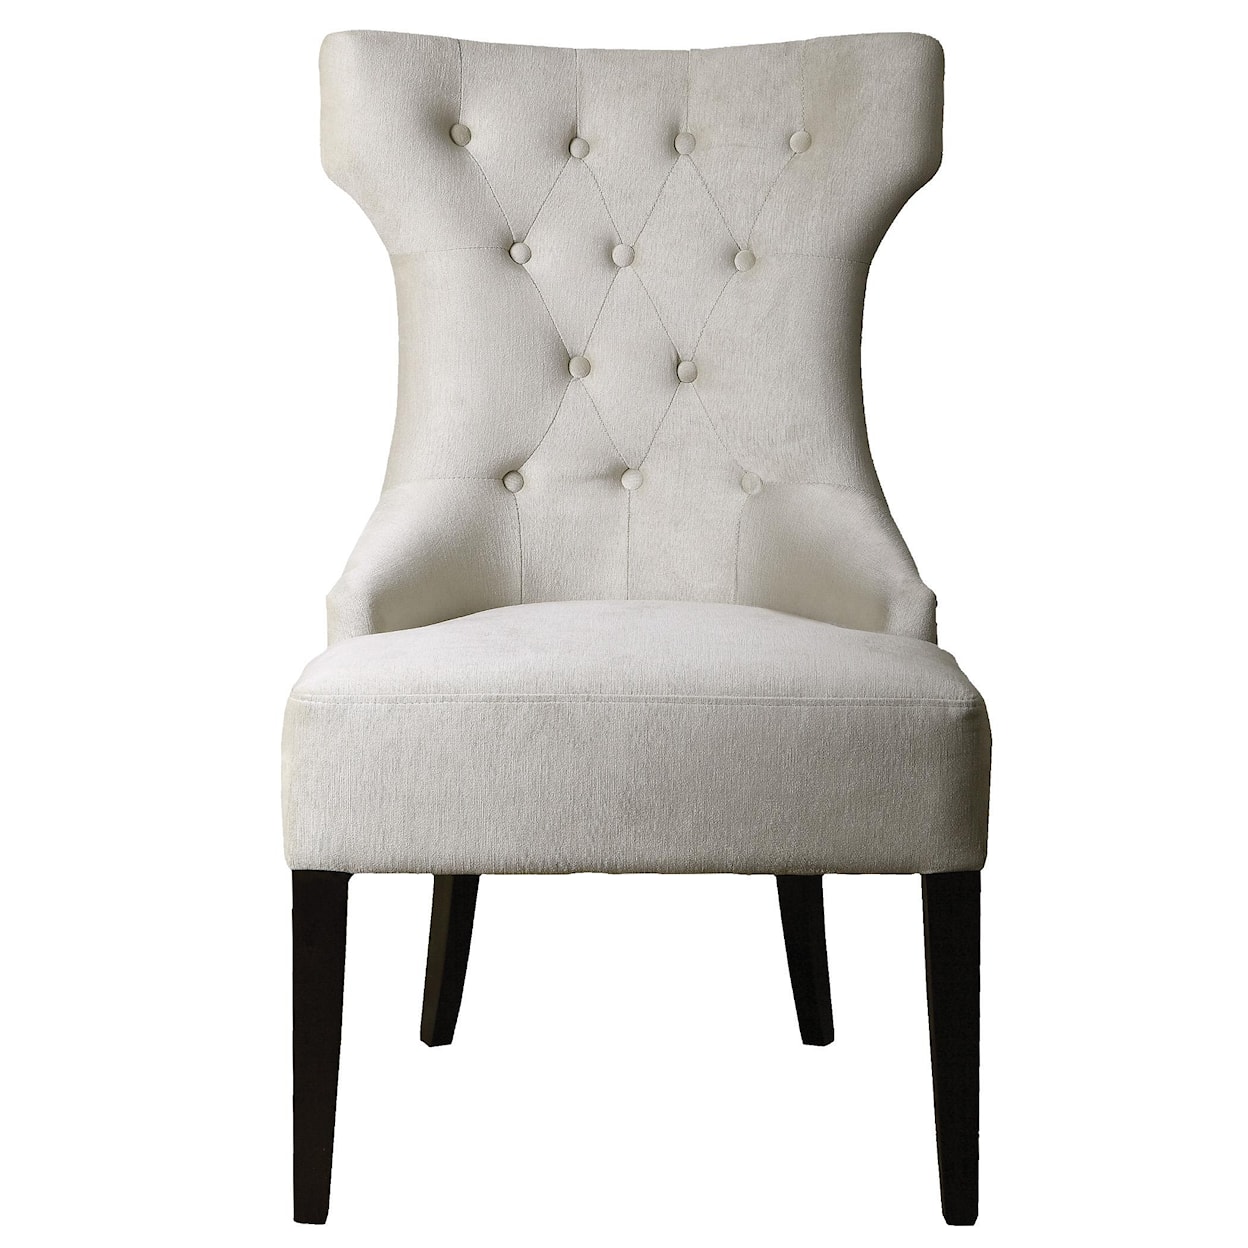 Uttermost Accent Furniture - Accent Chairs Arlette Tufted Wing Chair